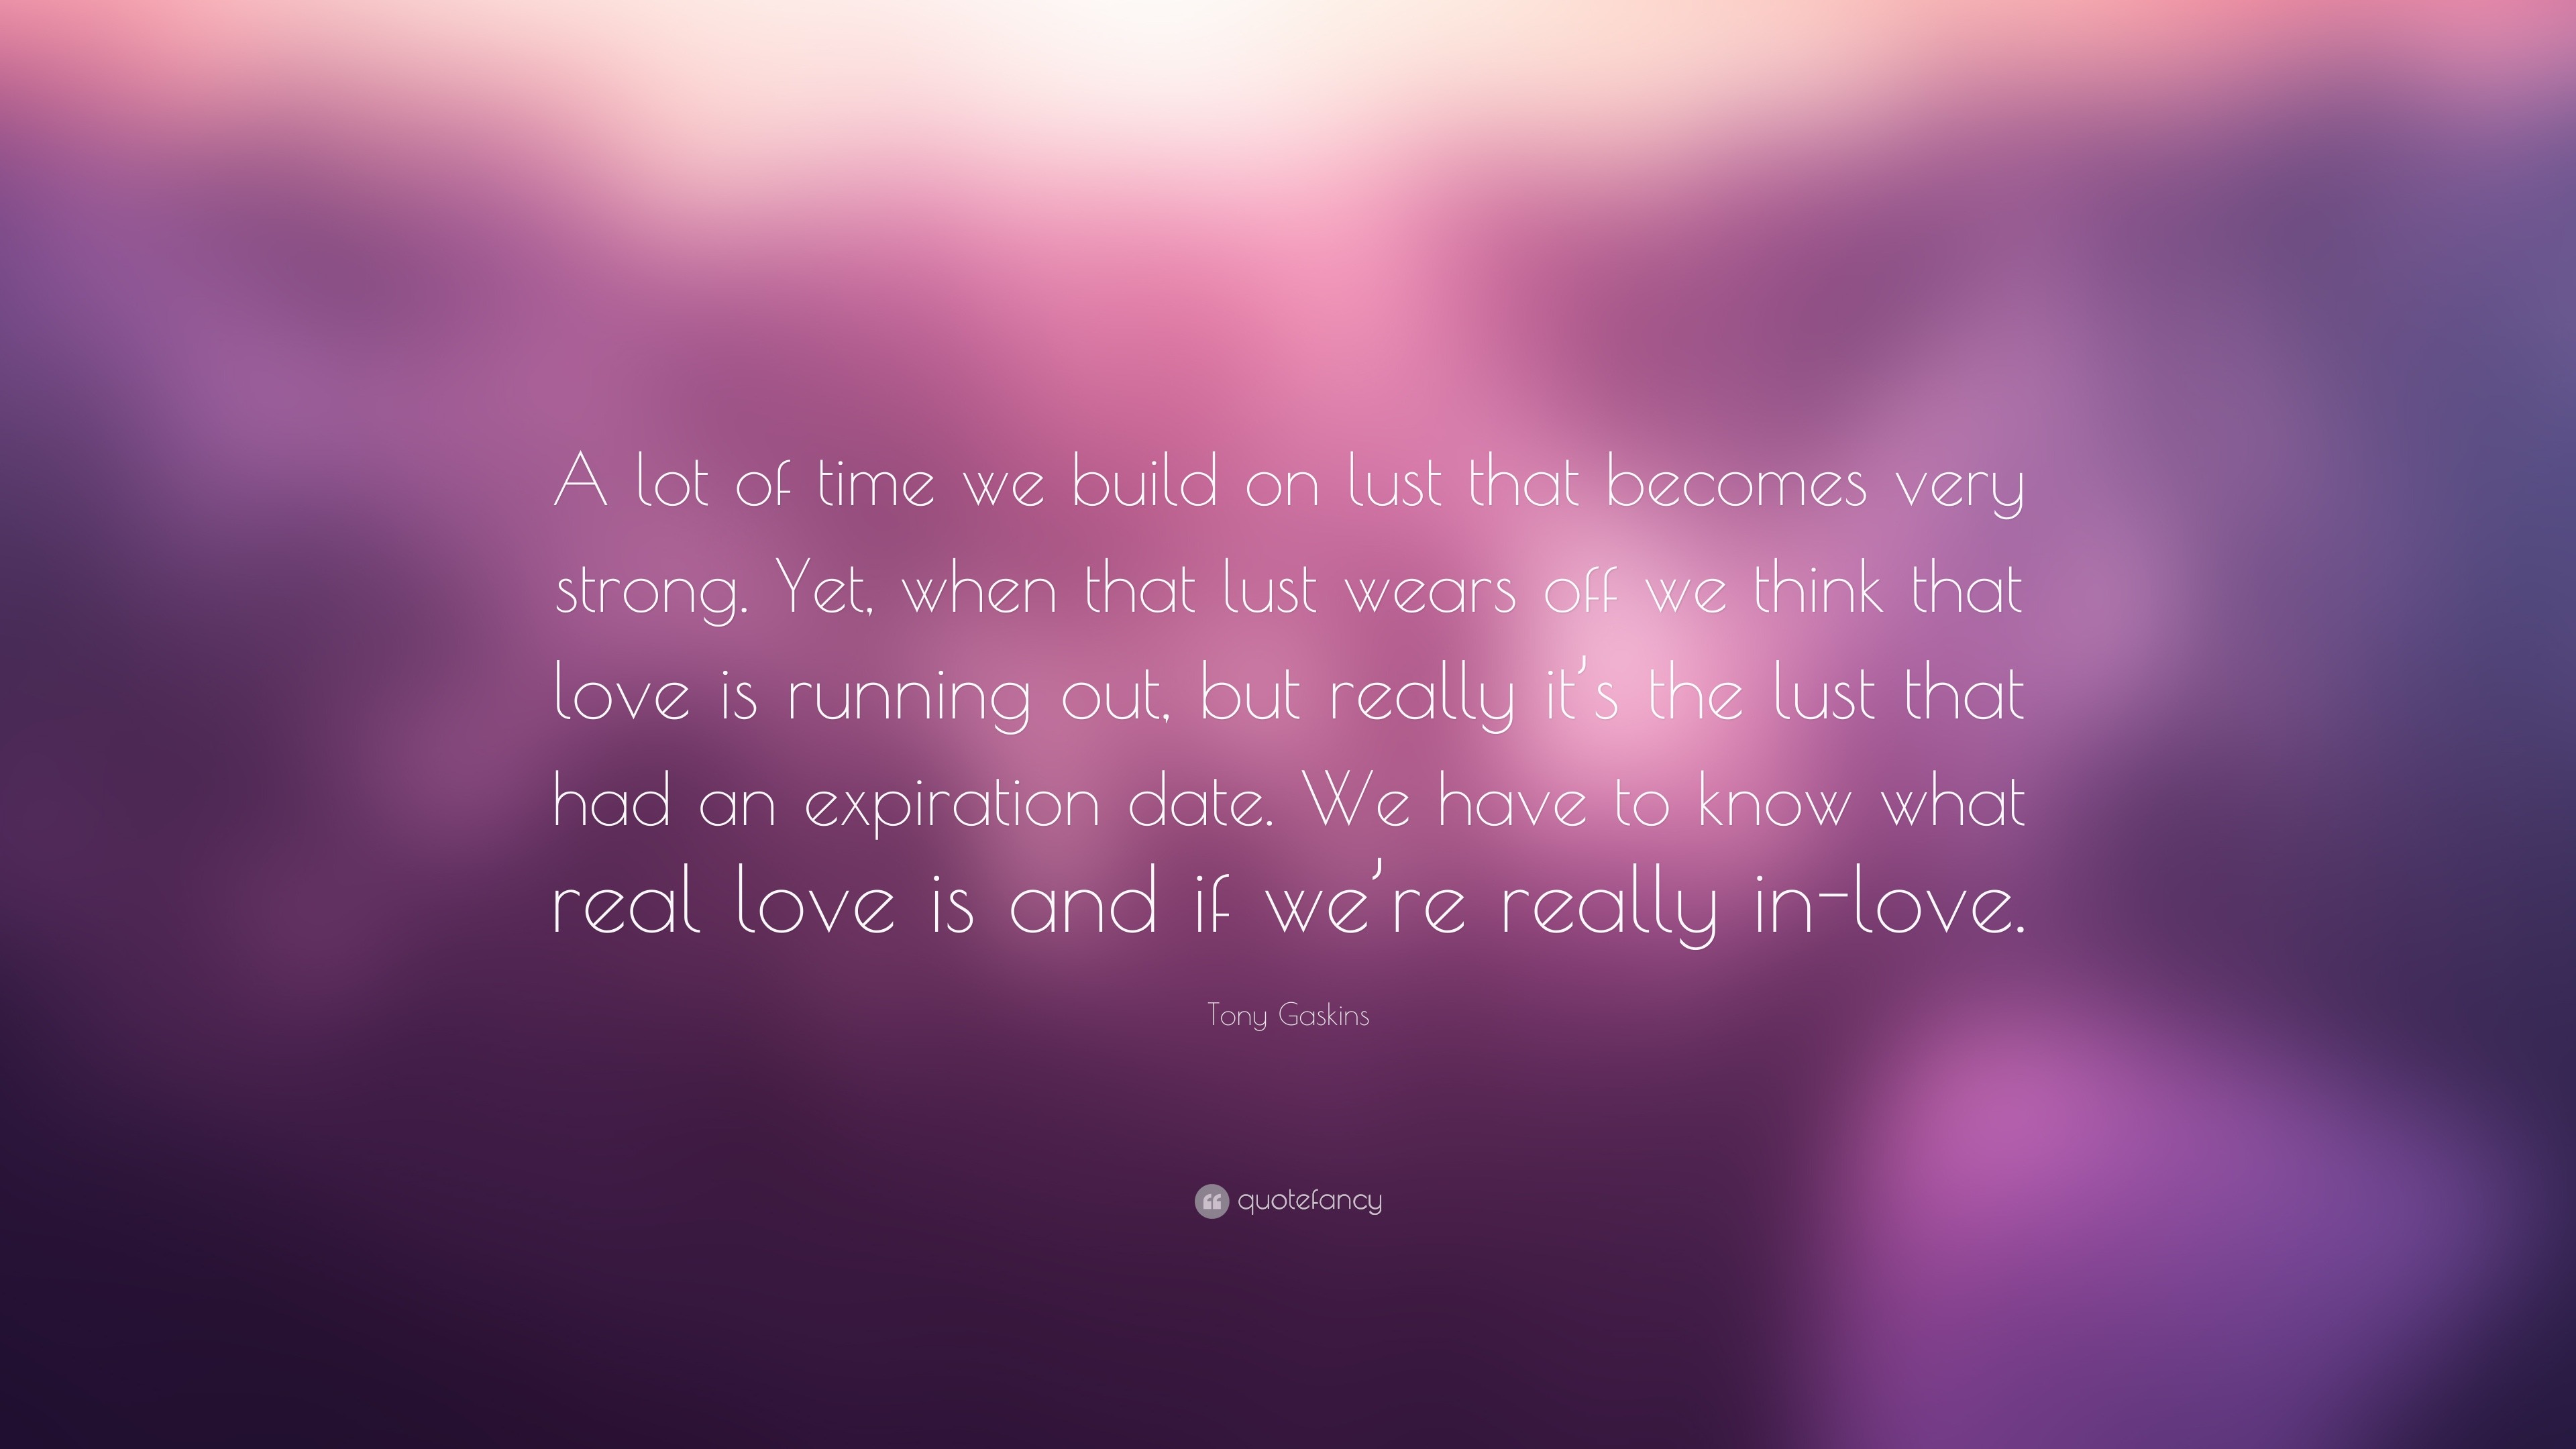 Tony Gaskins Quote “A lot of time we build on lust that be es very